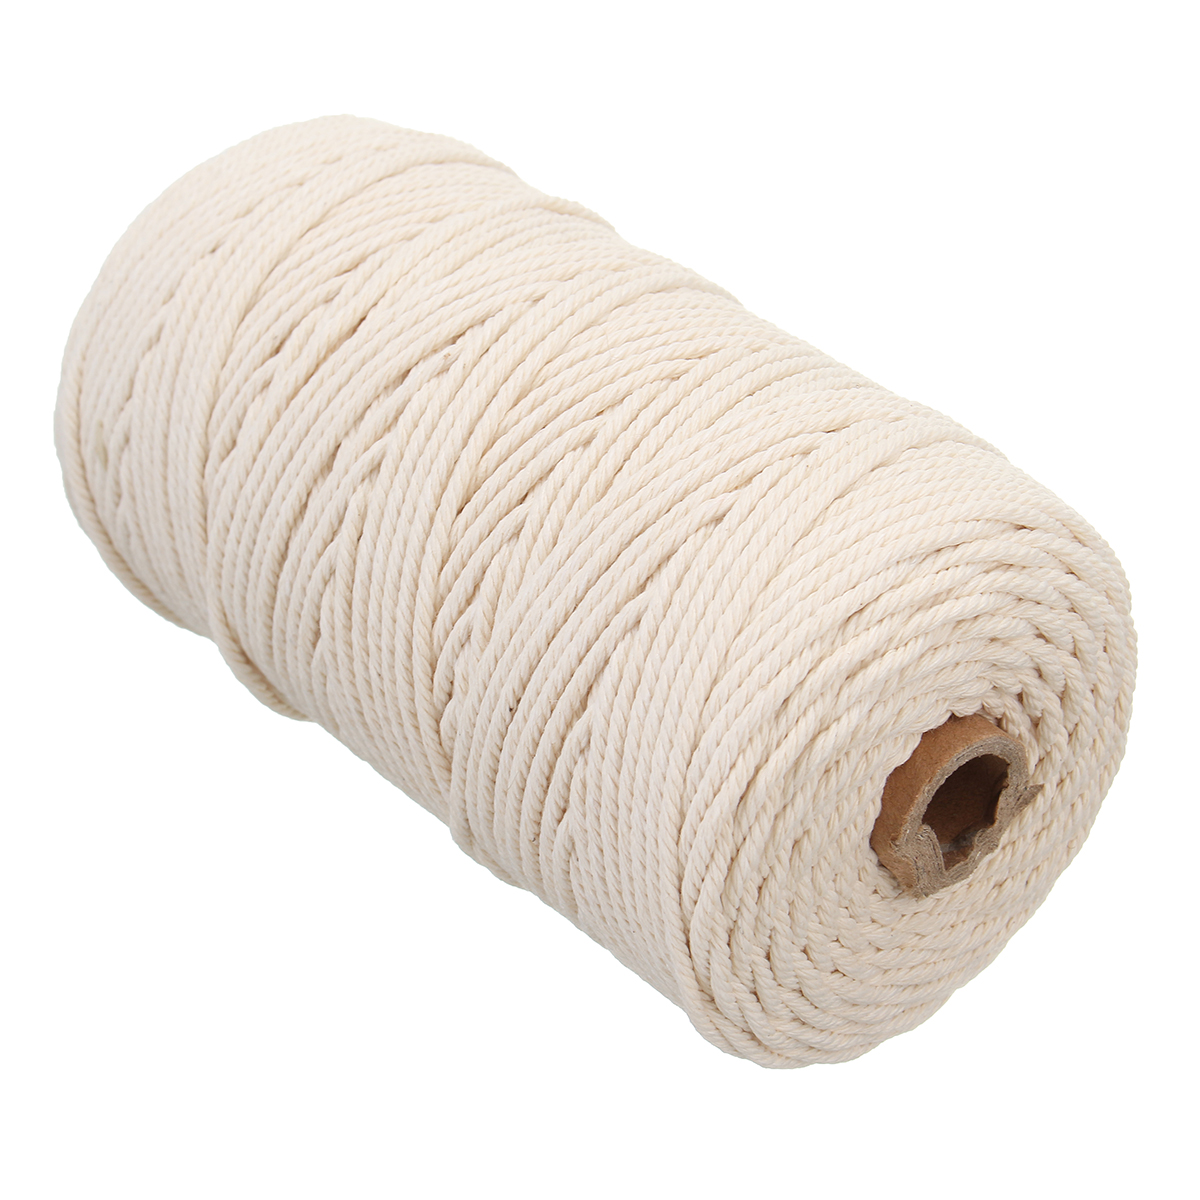 5Pcs-200Mx3mm-Natural-Beige-Cotton-Twisted-Cord-Rope-Braided-Wire-DIY-Craft-Macrame-String-1396554-4